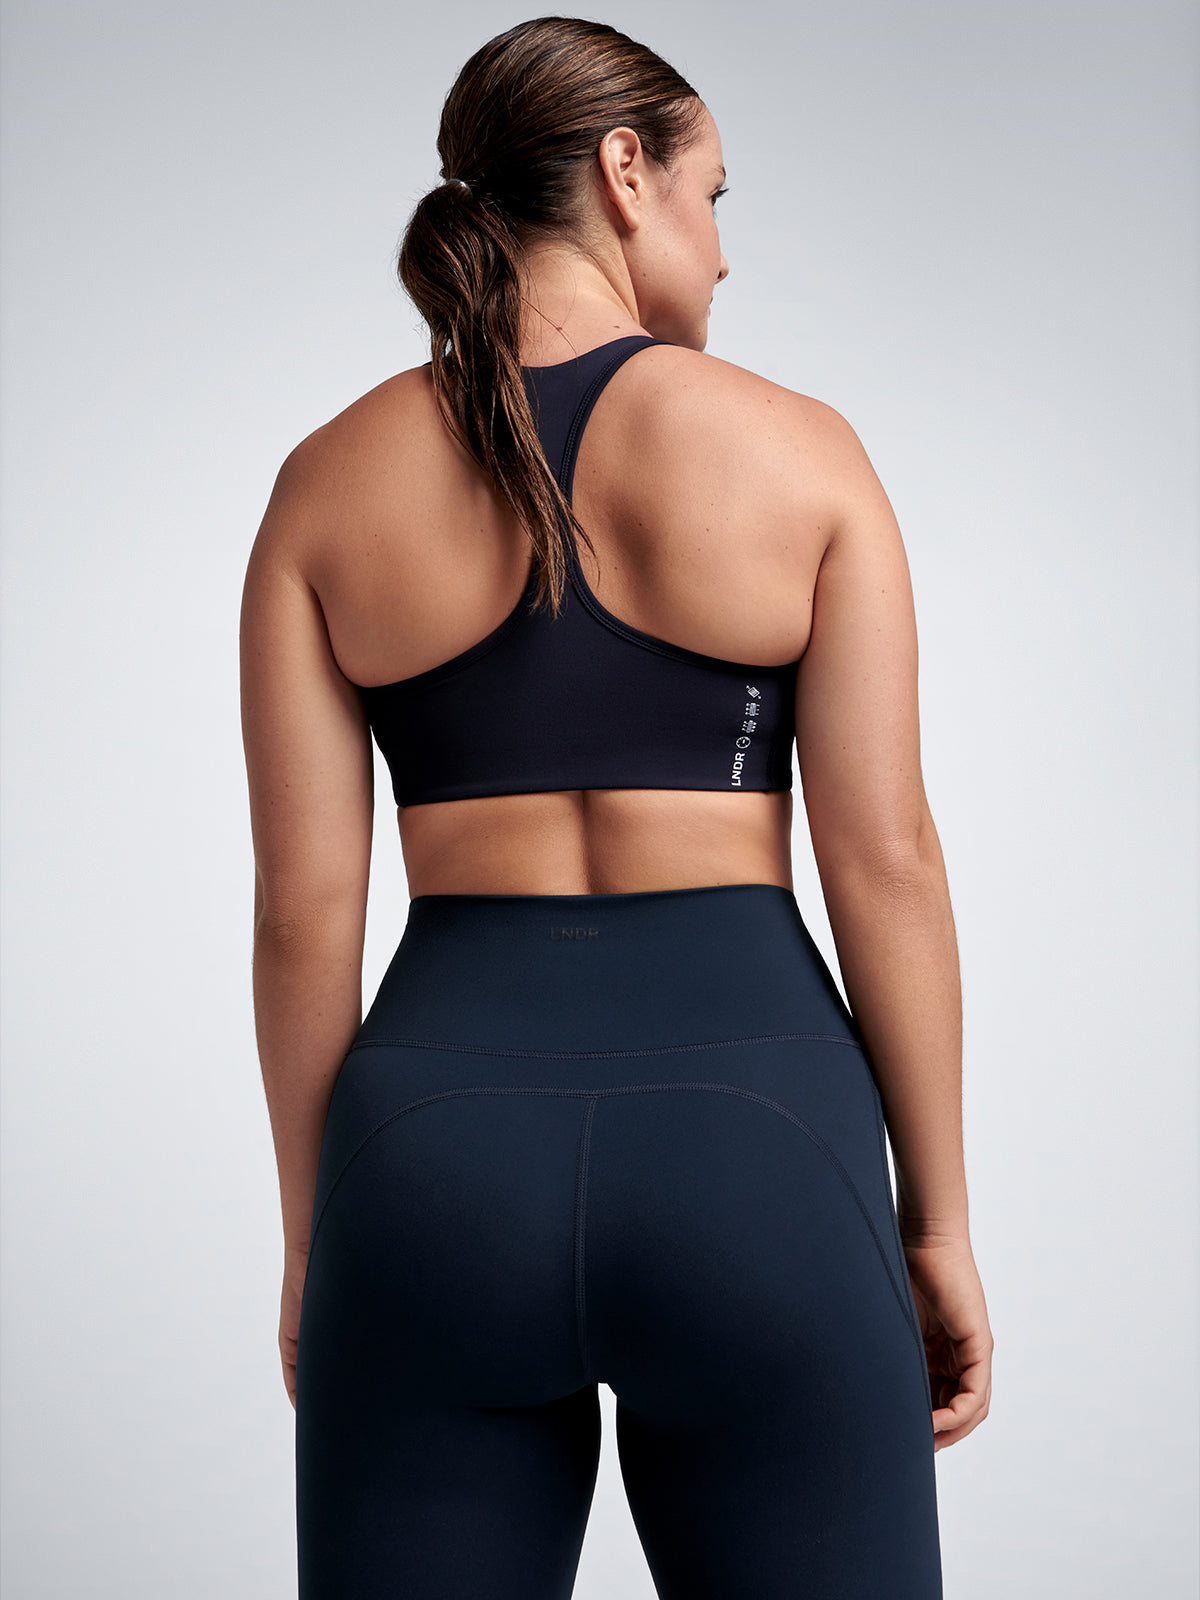 Snap Sports Bra by LNDR at ORCHARD MILE